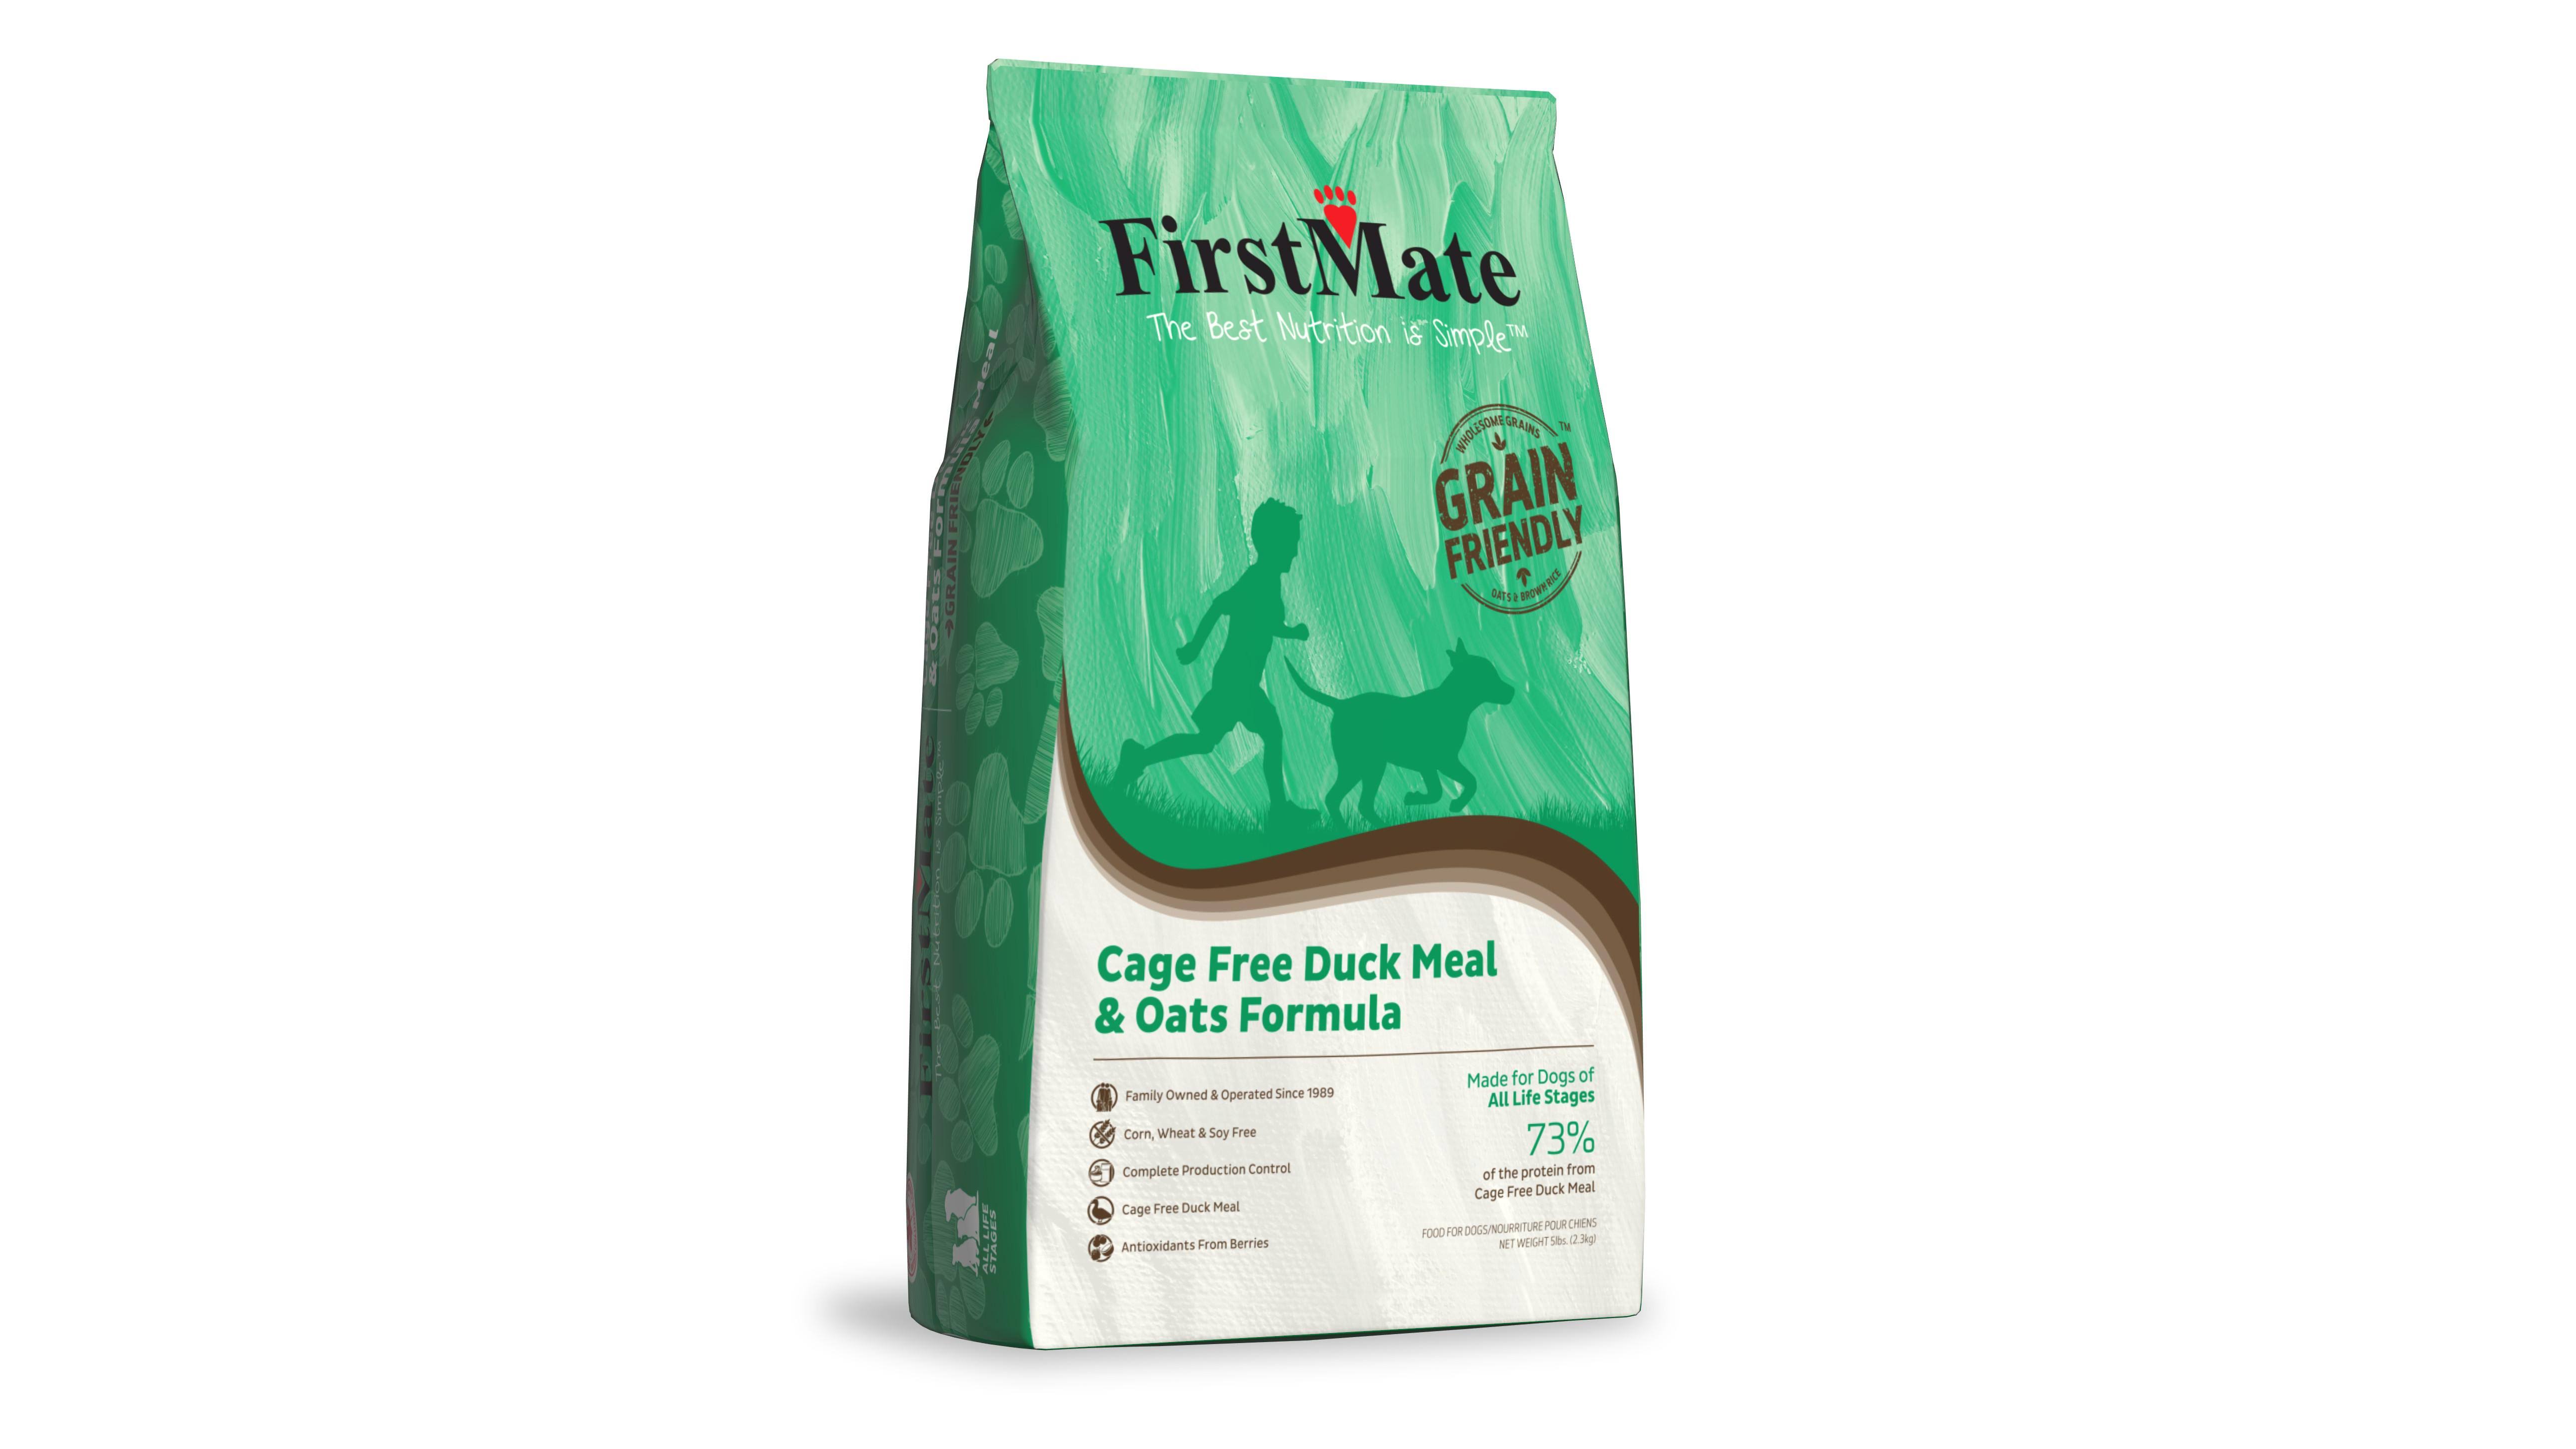 FirstMate Grain Friendly Cage Free Duck & Oats Dry Dog Food, 5 lbs